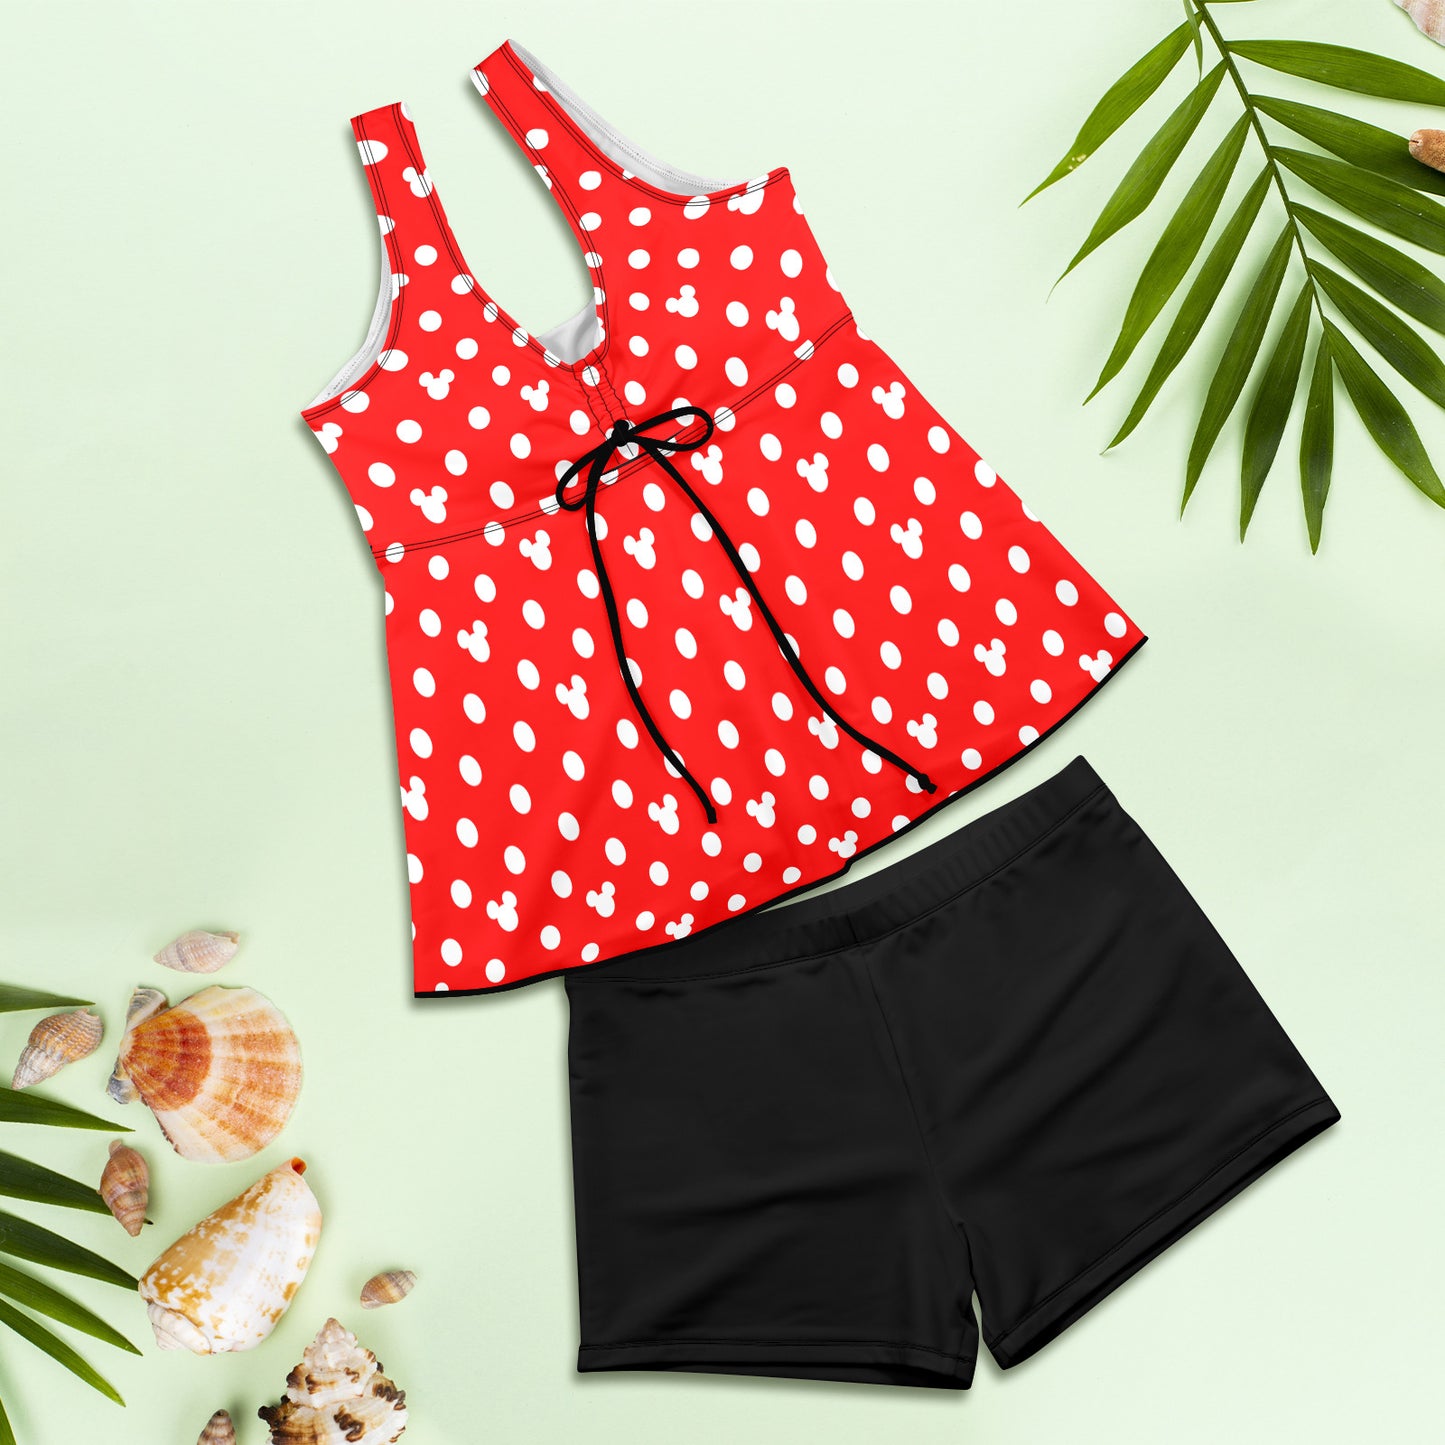 Red With White Mickey Polka Dots Two Piece Tankini Women's Swimsuit